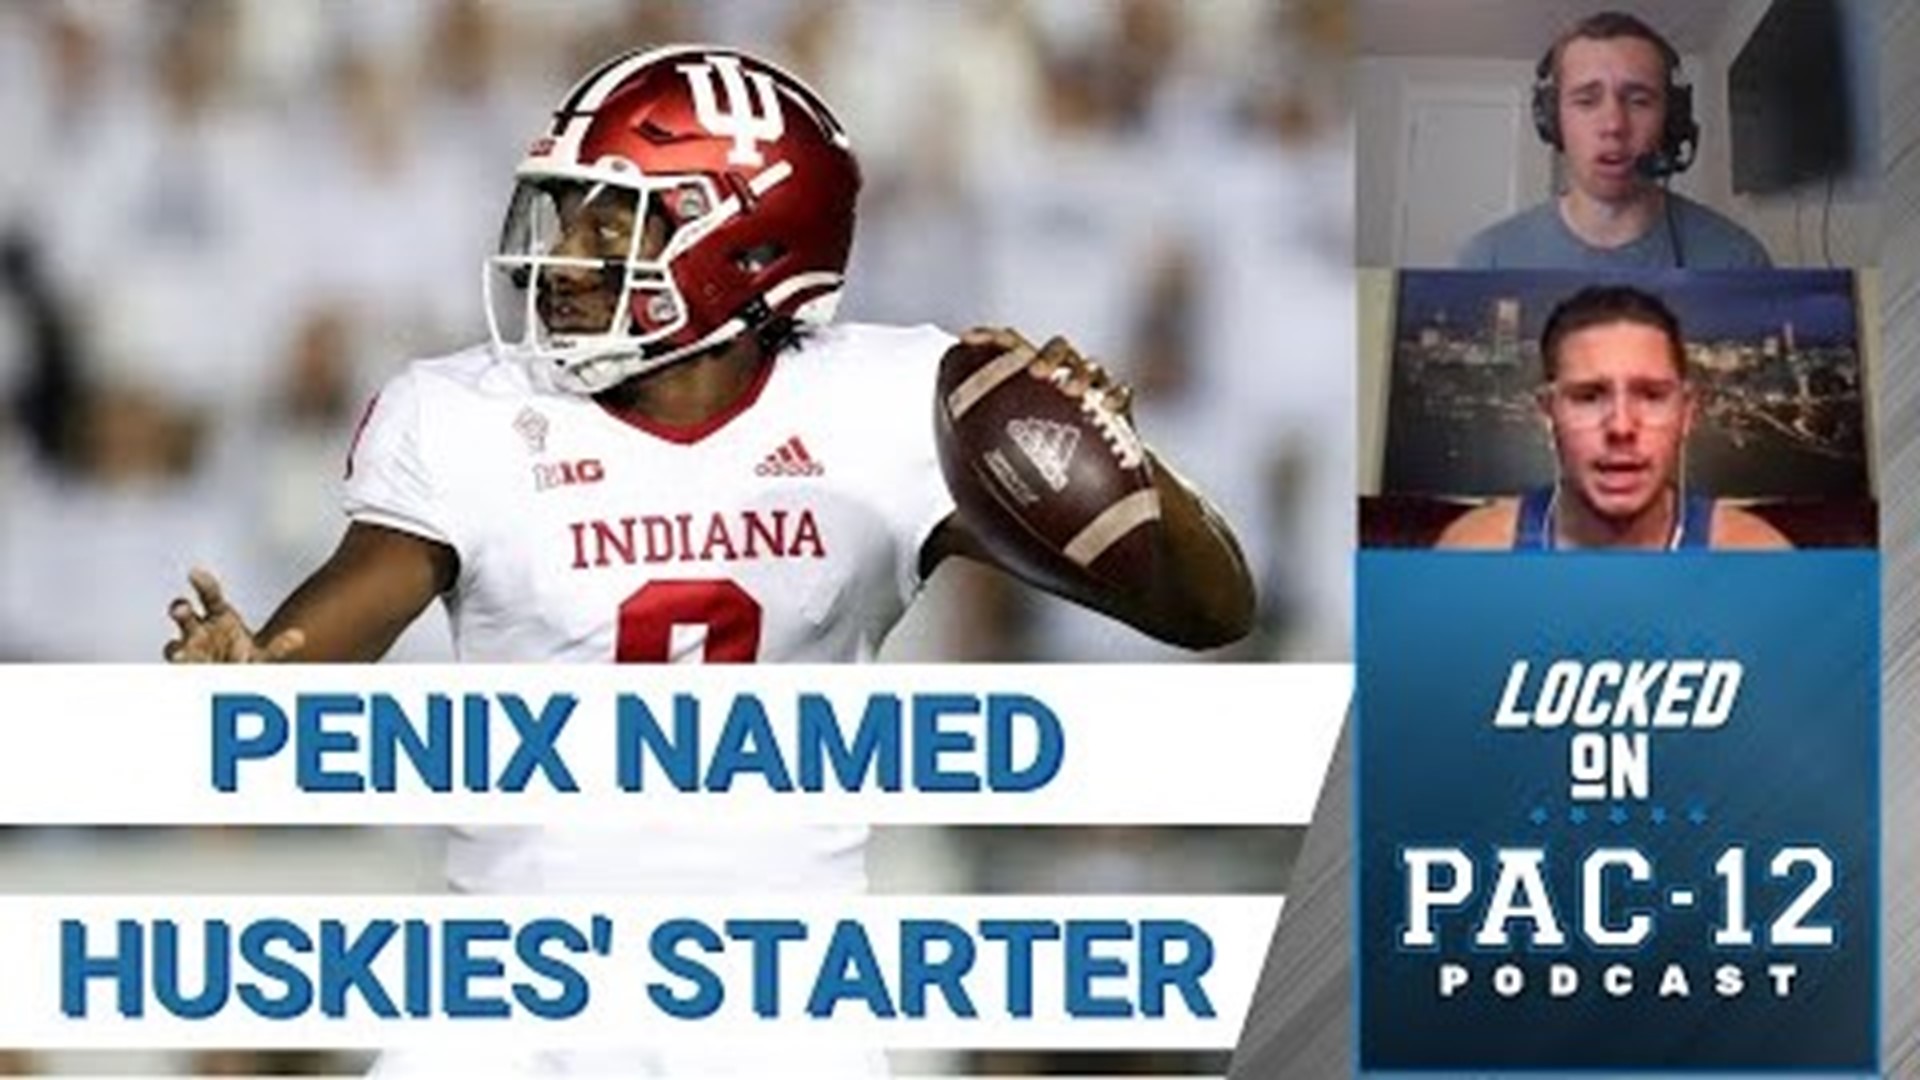 With three guys seemingly in contention for the start, Washington has announced that Indiana's Michael Penix Jr. will be the starter for the Huskies.